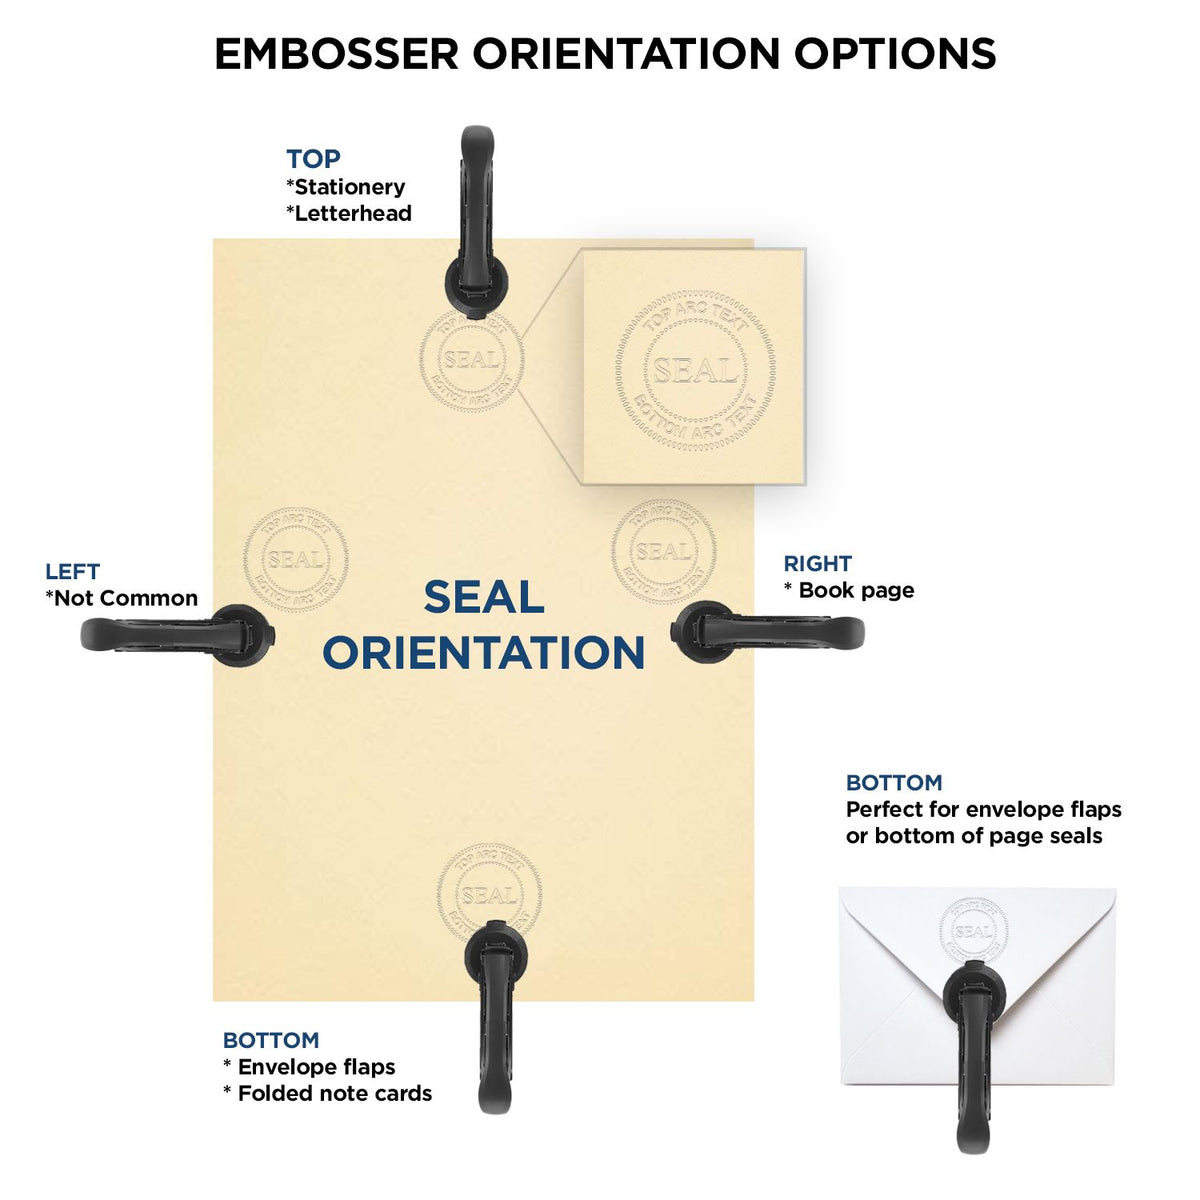 An infographic for the Handheld South Carolina Professional Geologist Embosser showing embosser orientation, this is showing examples of a top, bottom, right and left insert.